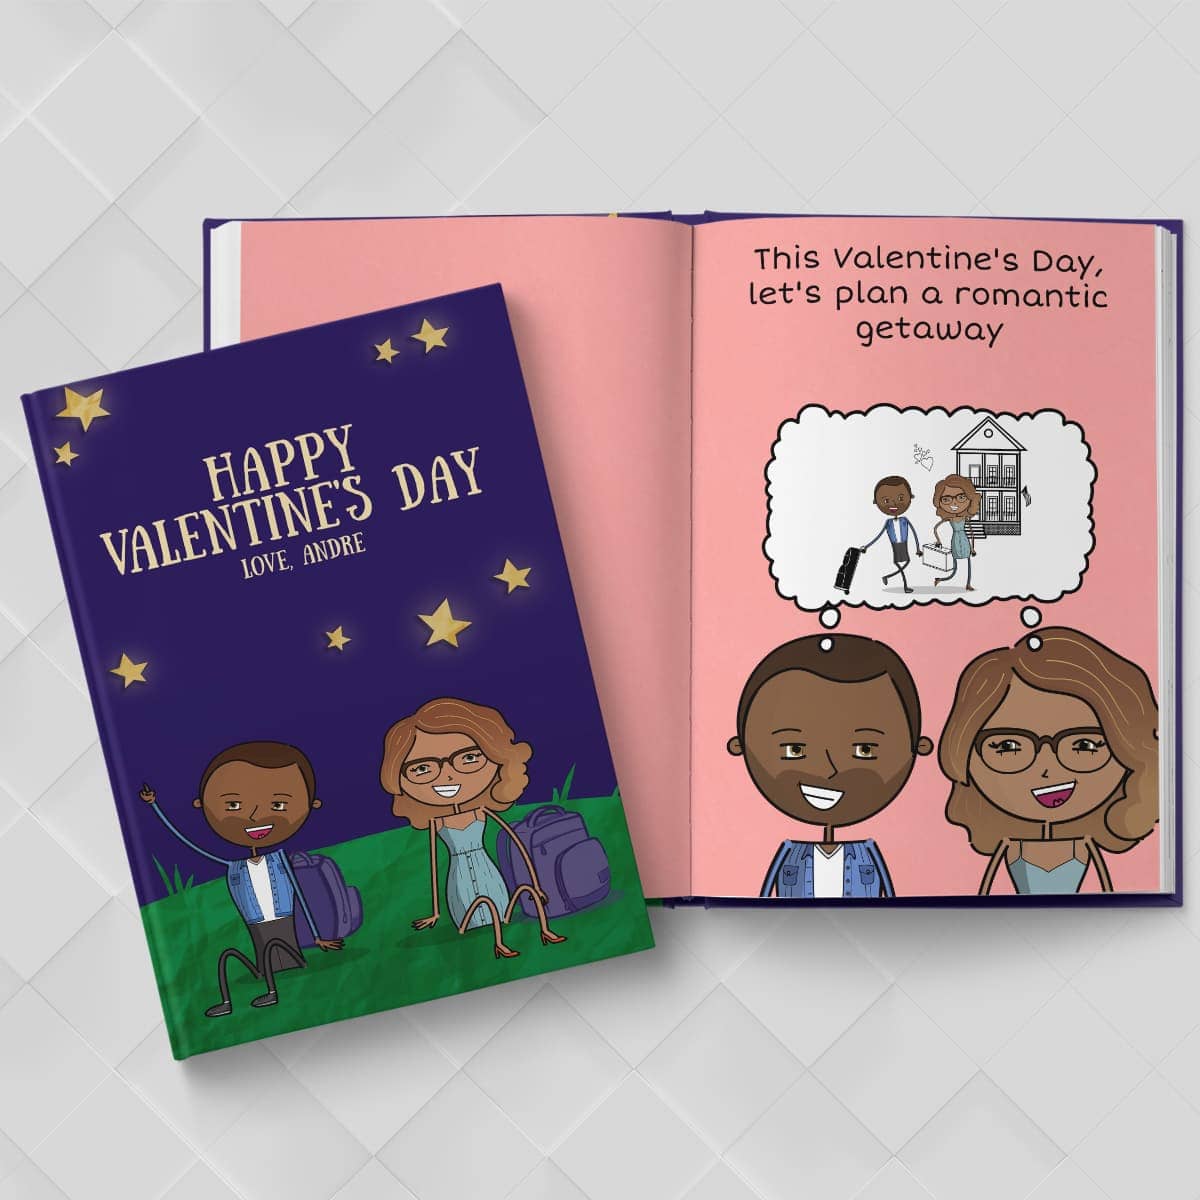 Valentine's Day Gifts by LoveBook | The Personalized Gift Book That Says Why You Love Someone | LoveBook Online - 0